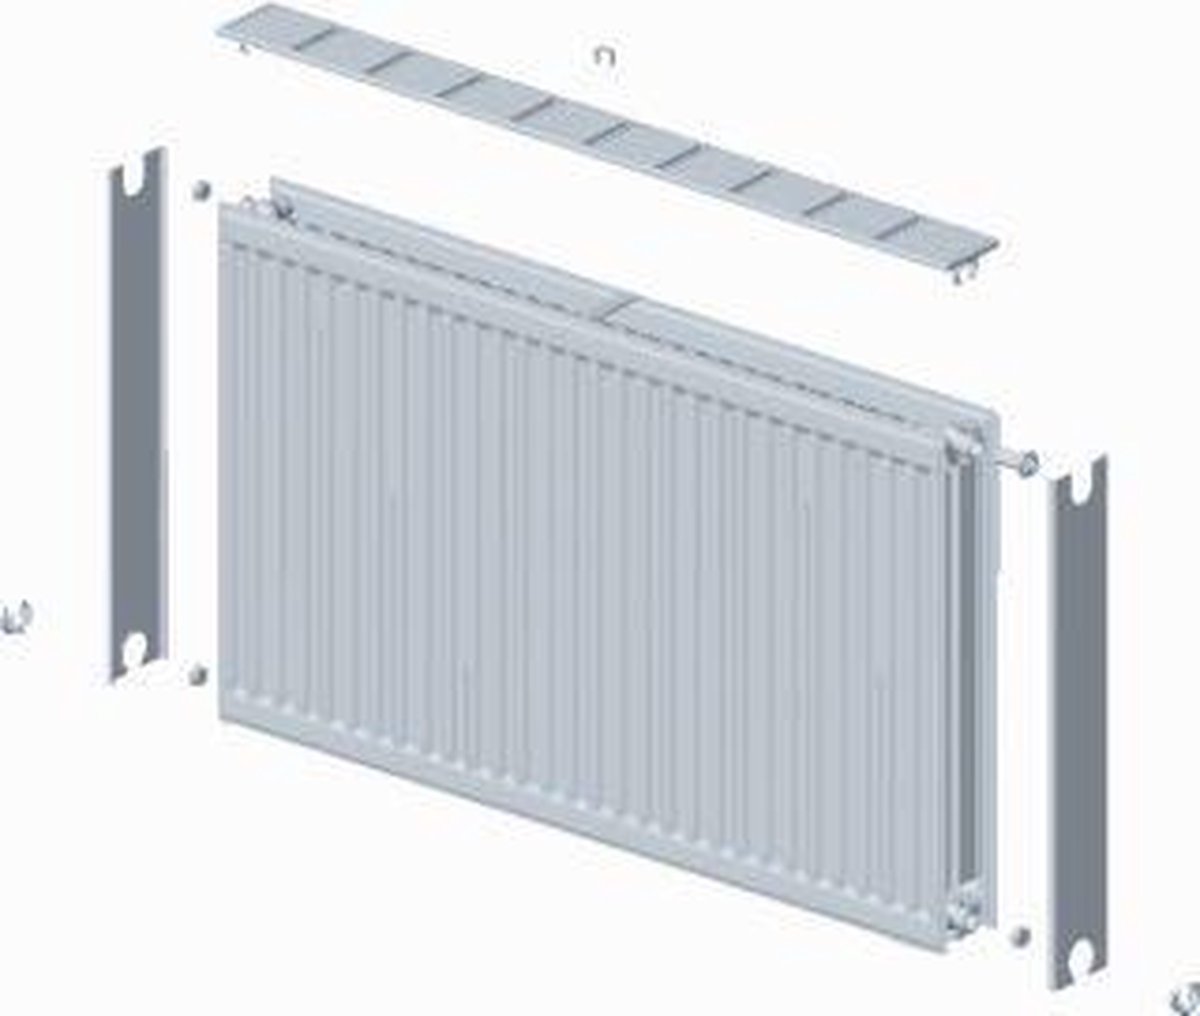 Stelrad paneelradiator Novello, staal, wit, (hxlxd) 600x1200x100mm, 22